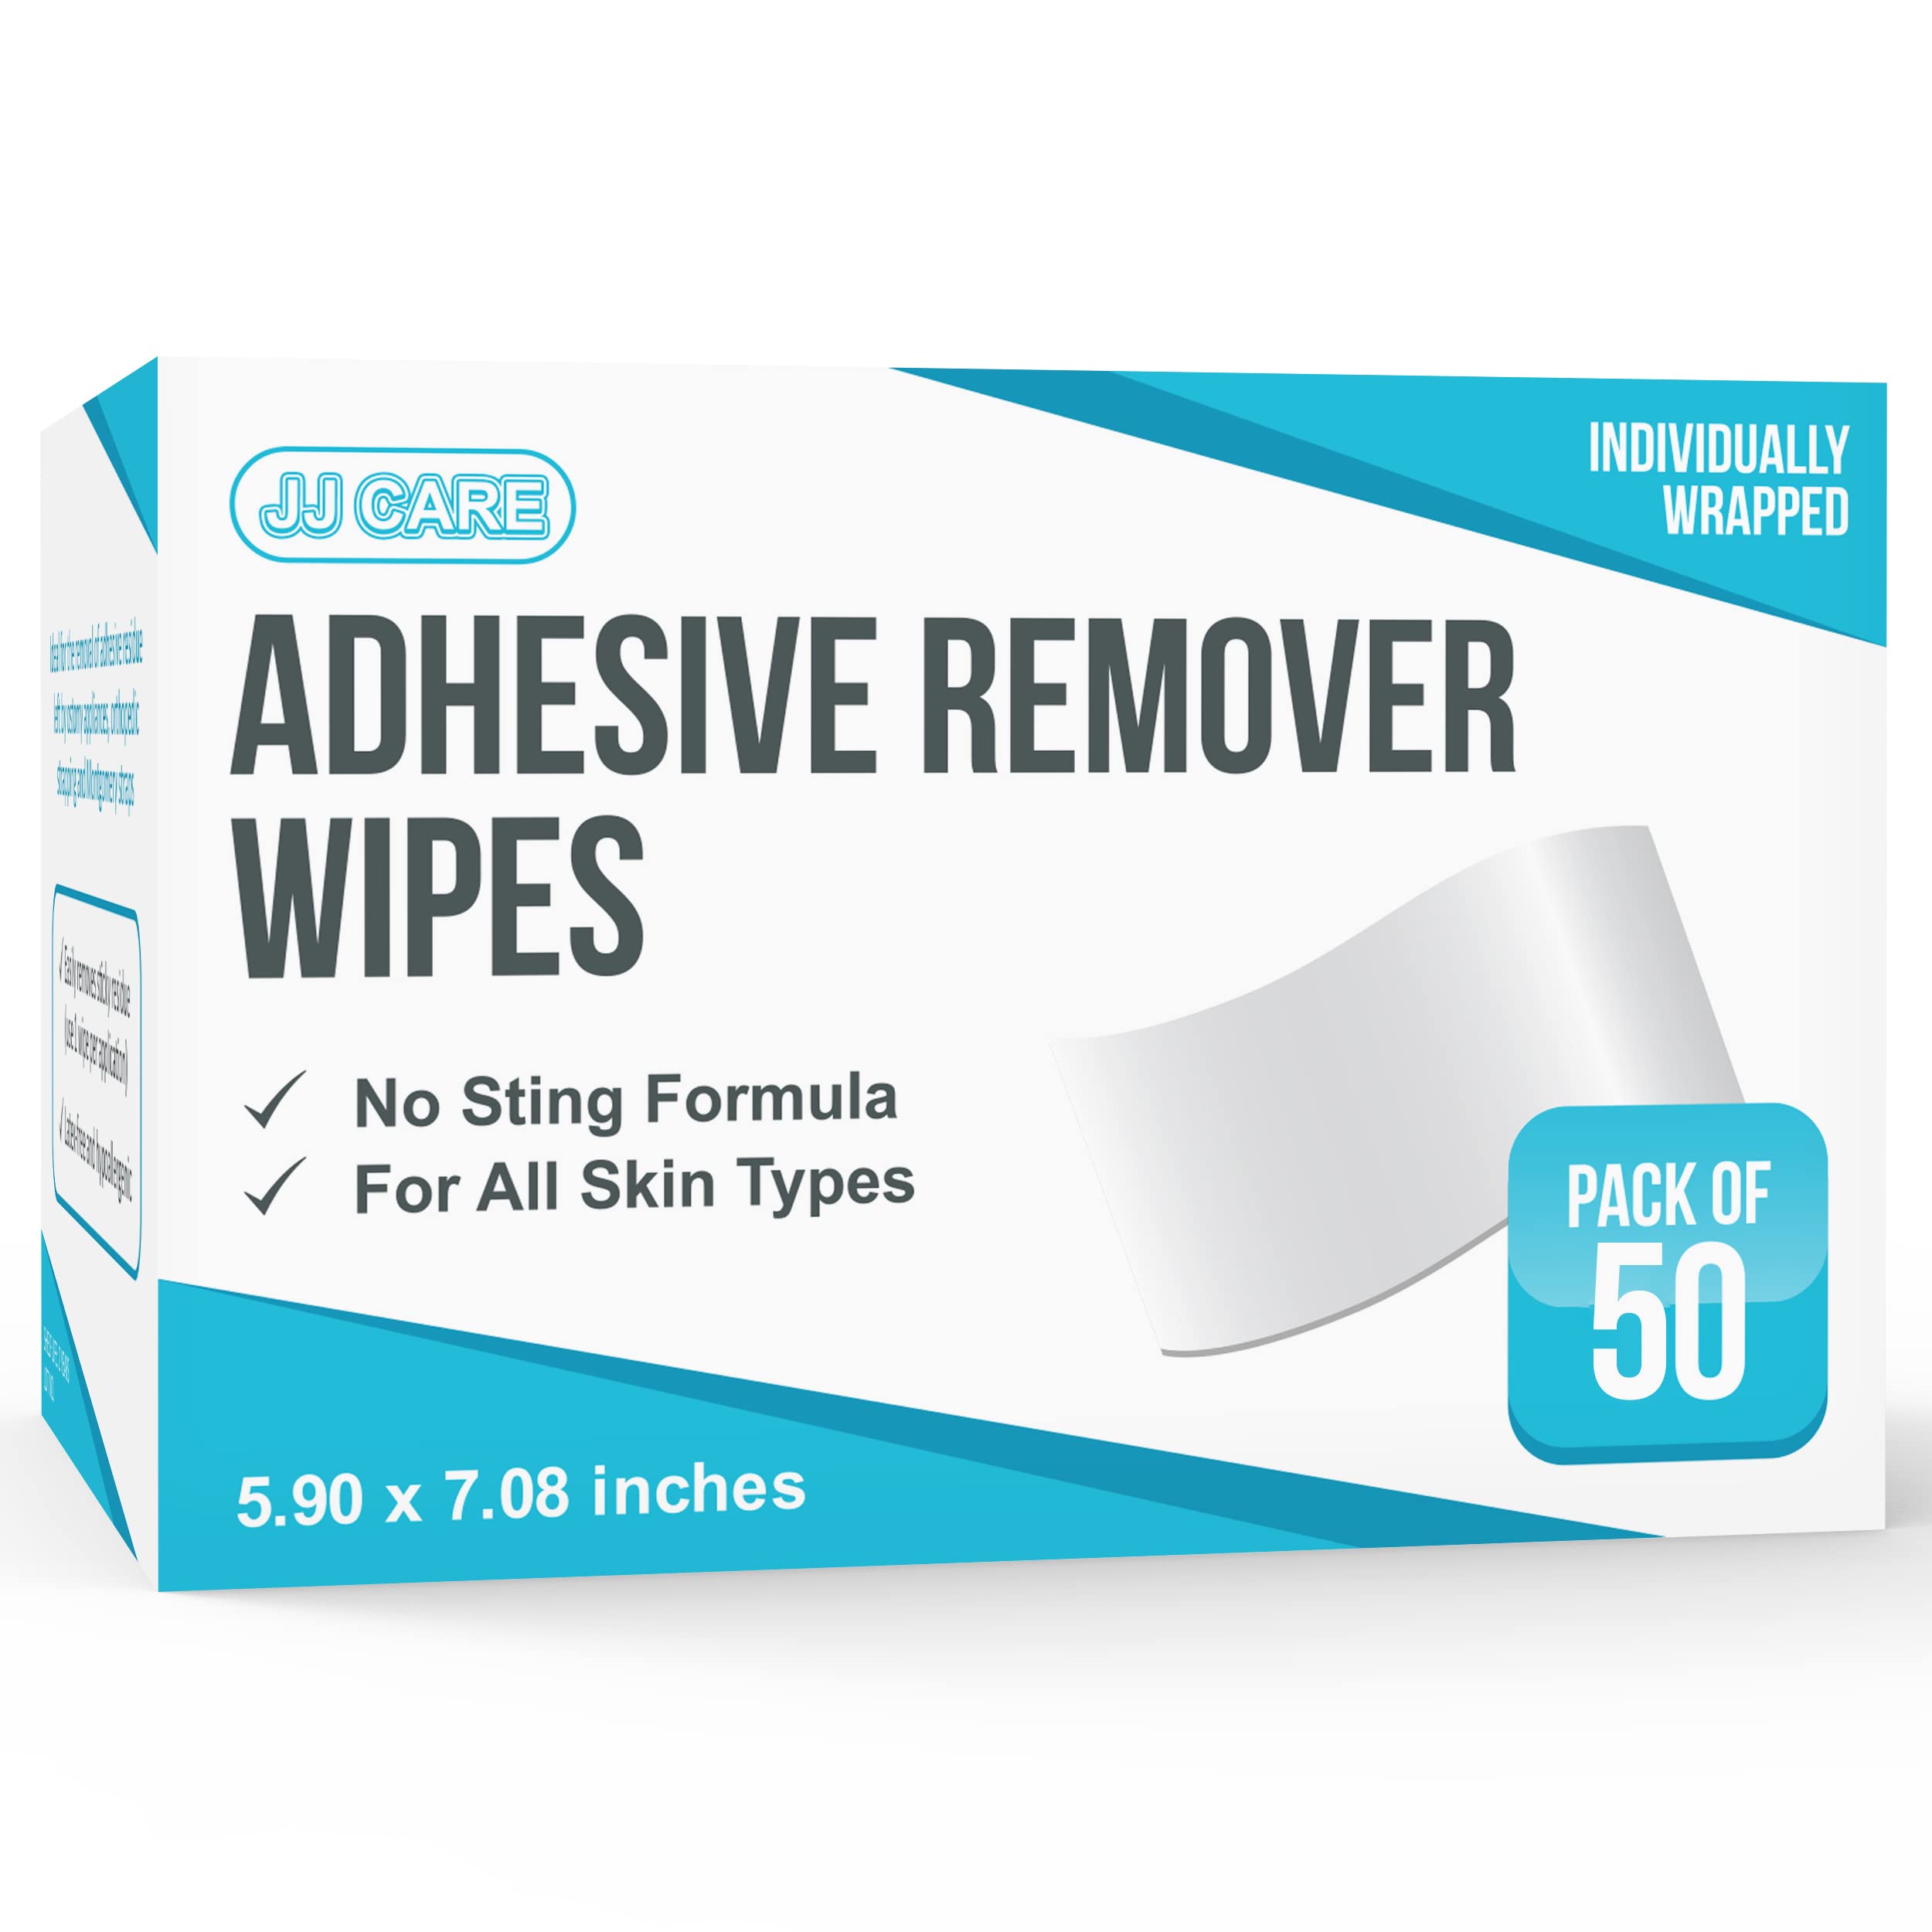 New Sting-Less Adhesive Remover Wipes, Bandage Adhesive Remover for Skin, Medical Adhesive Remover Wipes, Removes Bandages, Medical Tape, & Skin Adhesive  Remover, Stoma Wipes